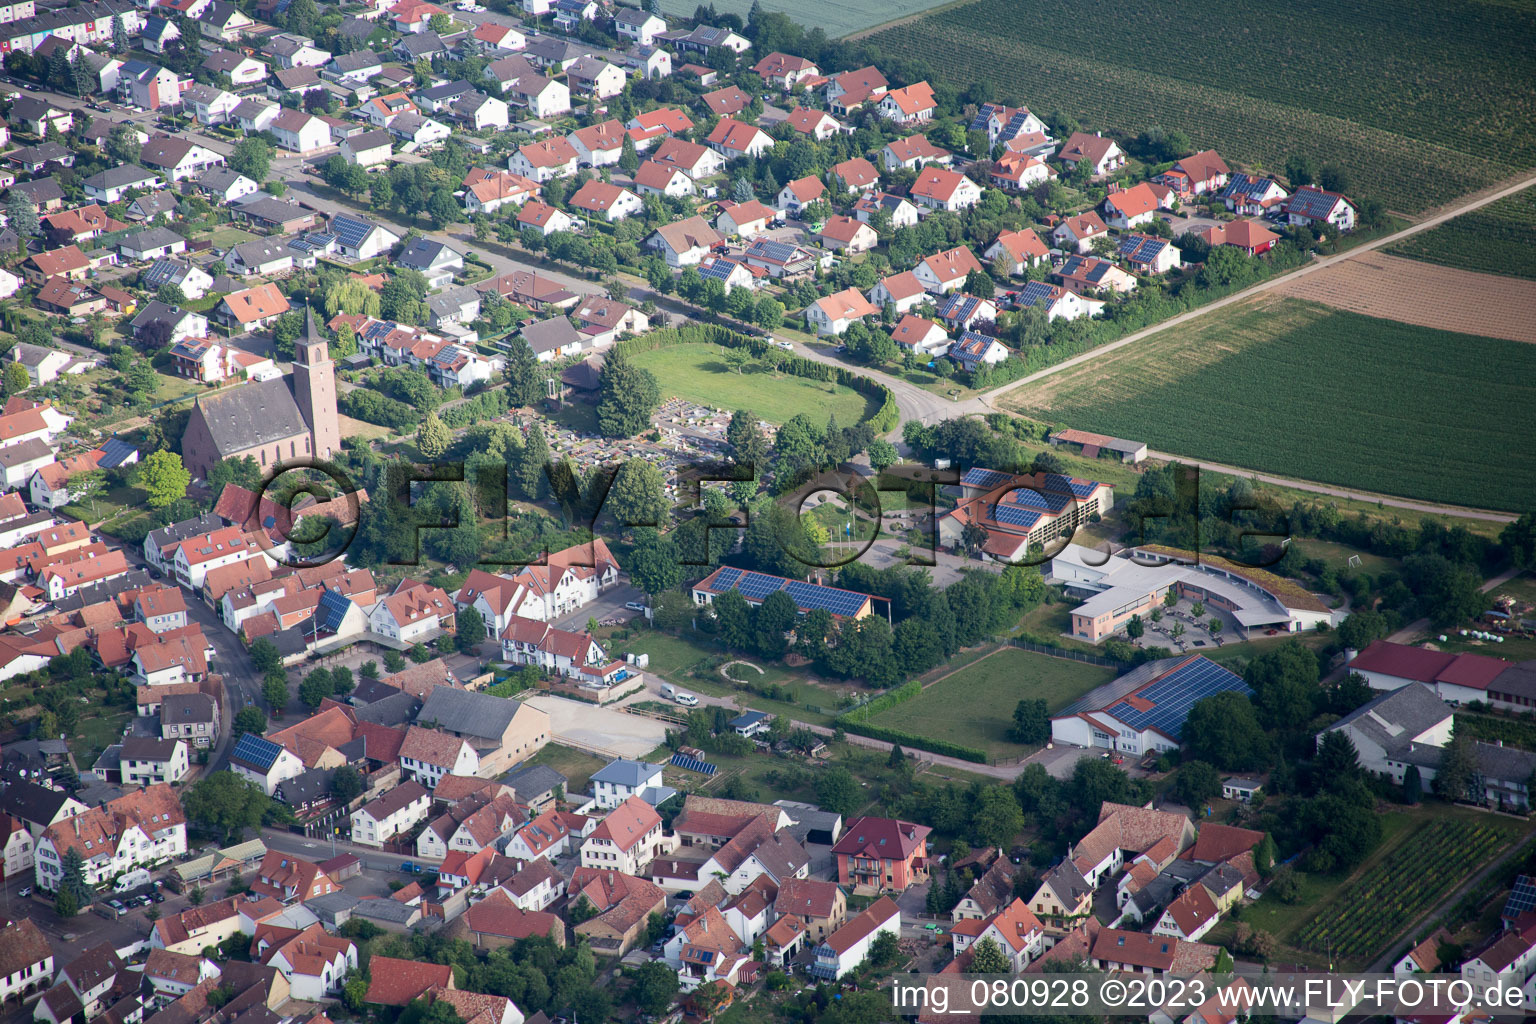 Aerial view of Essingen in the state Rhineland-Palatinate, Germany